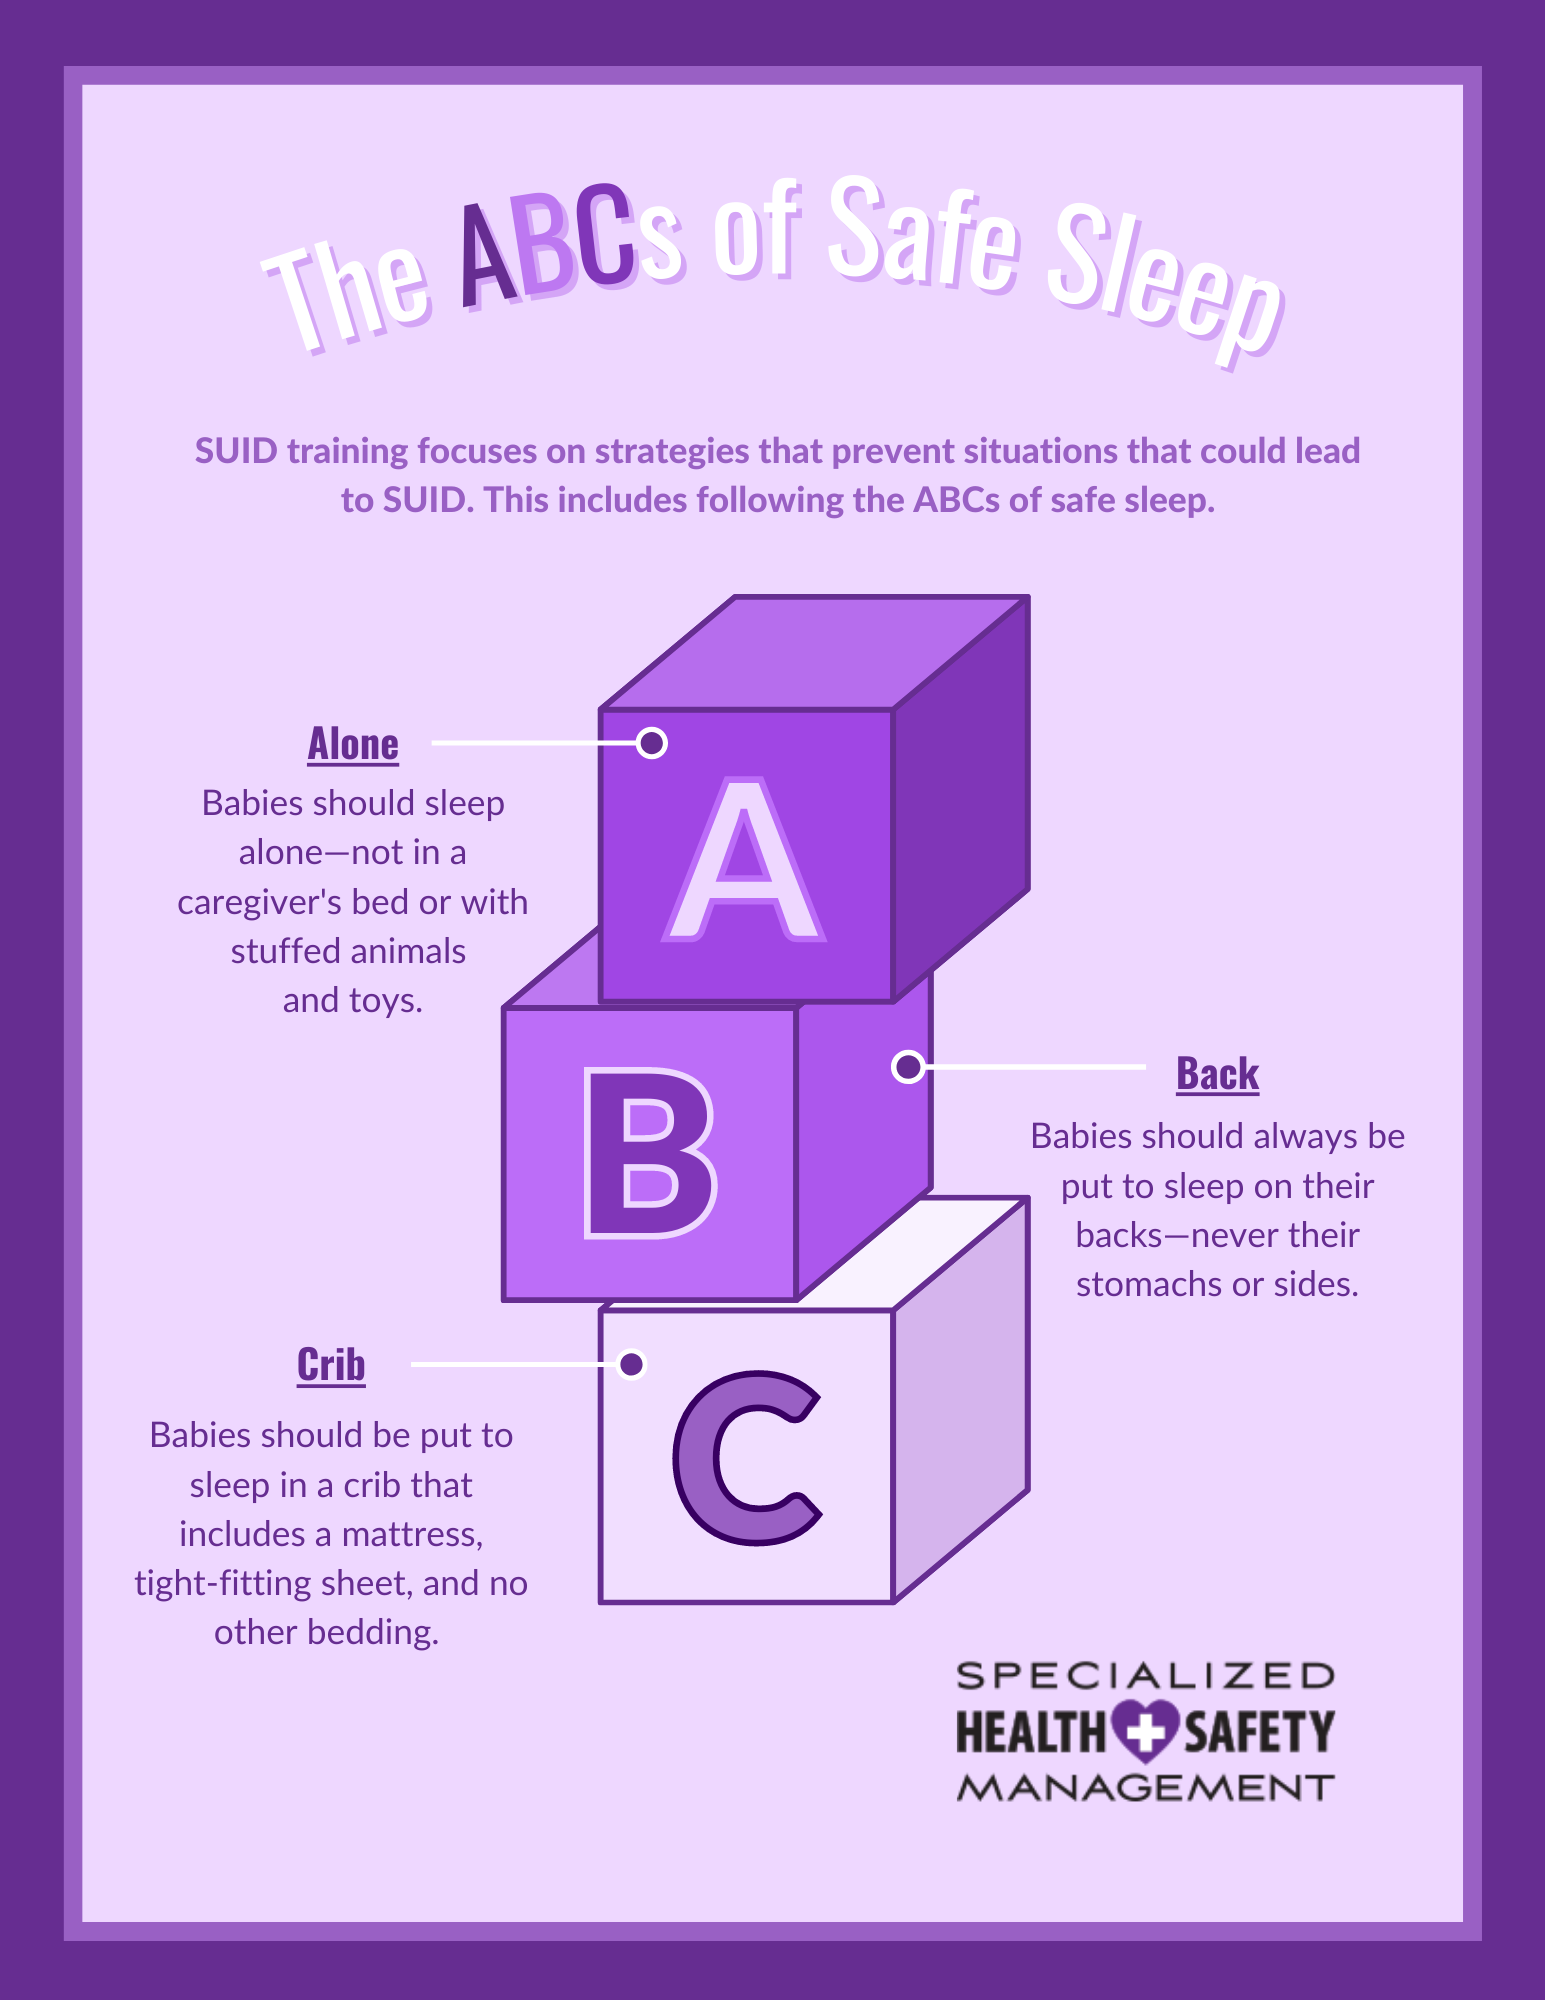 Infographic depicting the ABCs of safe sleep